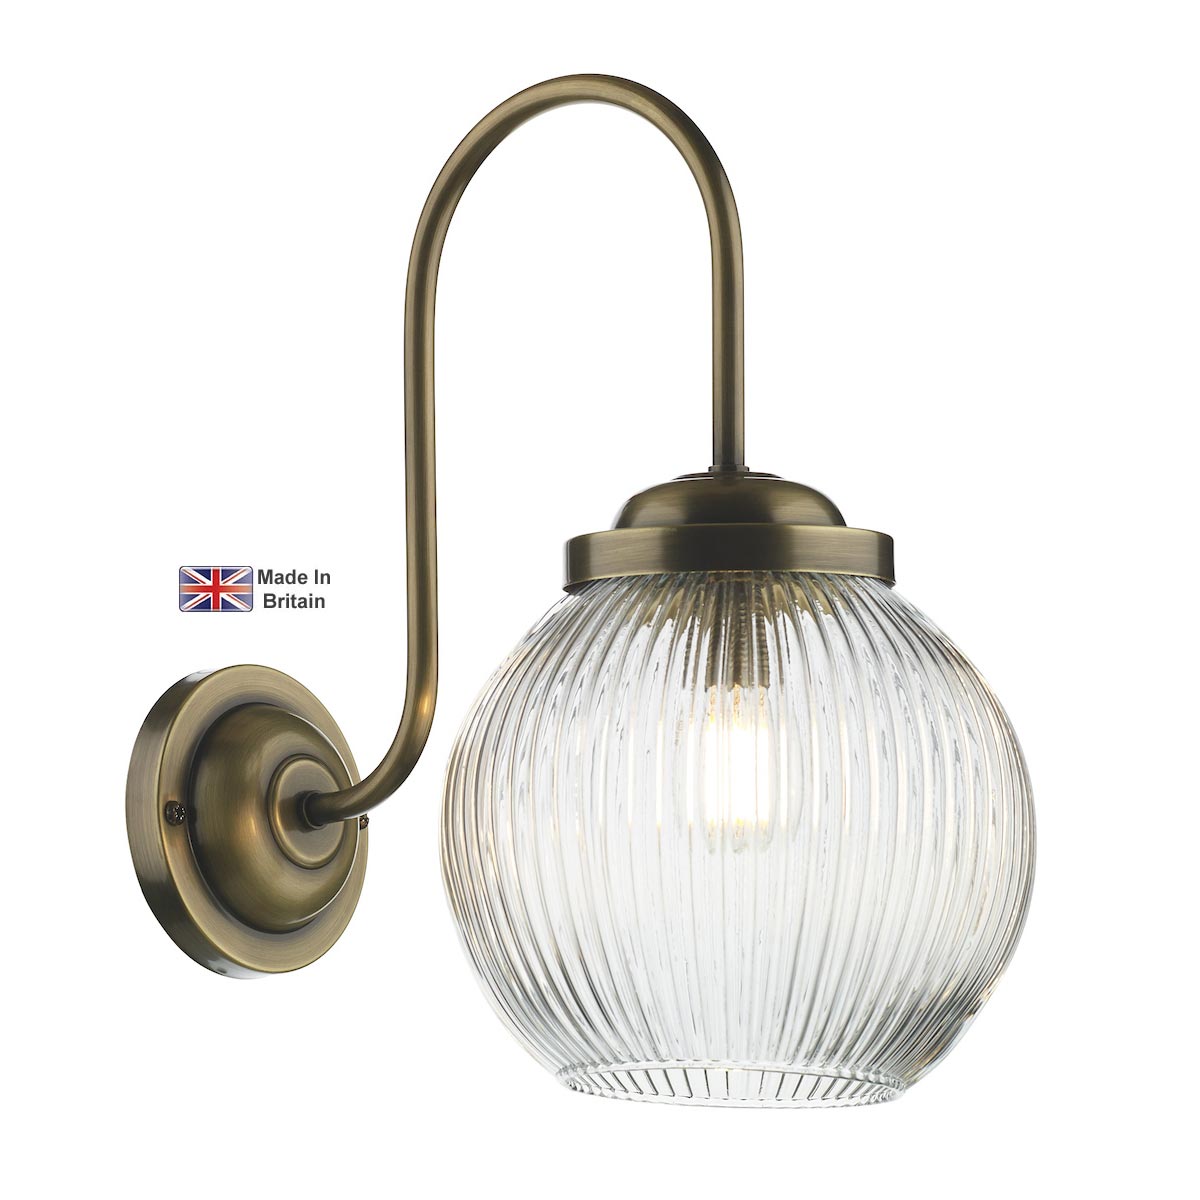 David Hunt Henley Antique Brass 1 Lamp Classic Wall Light Ribbed Glass